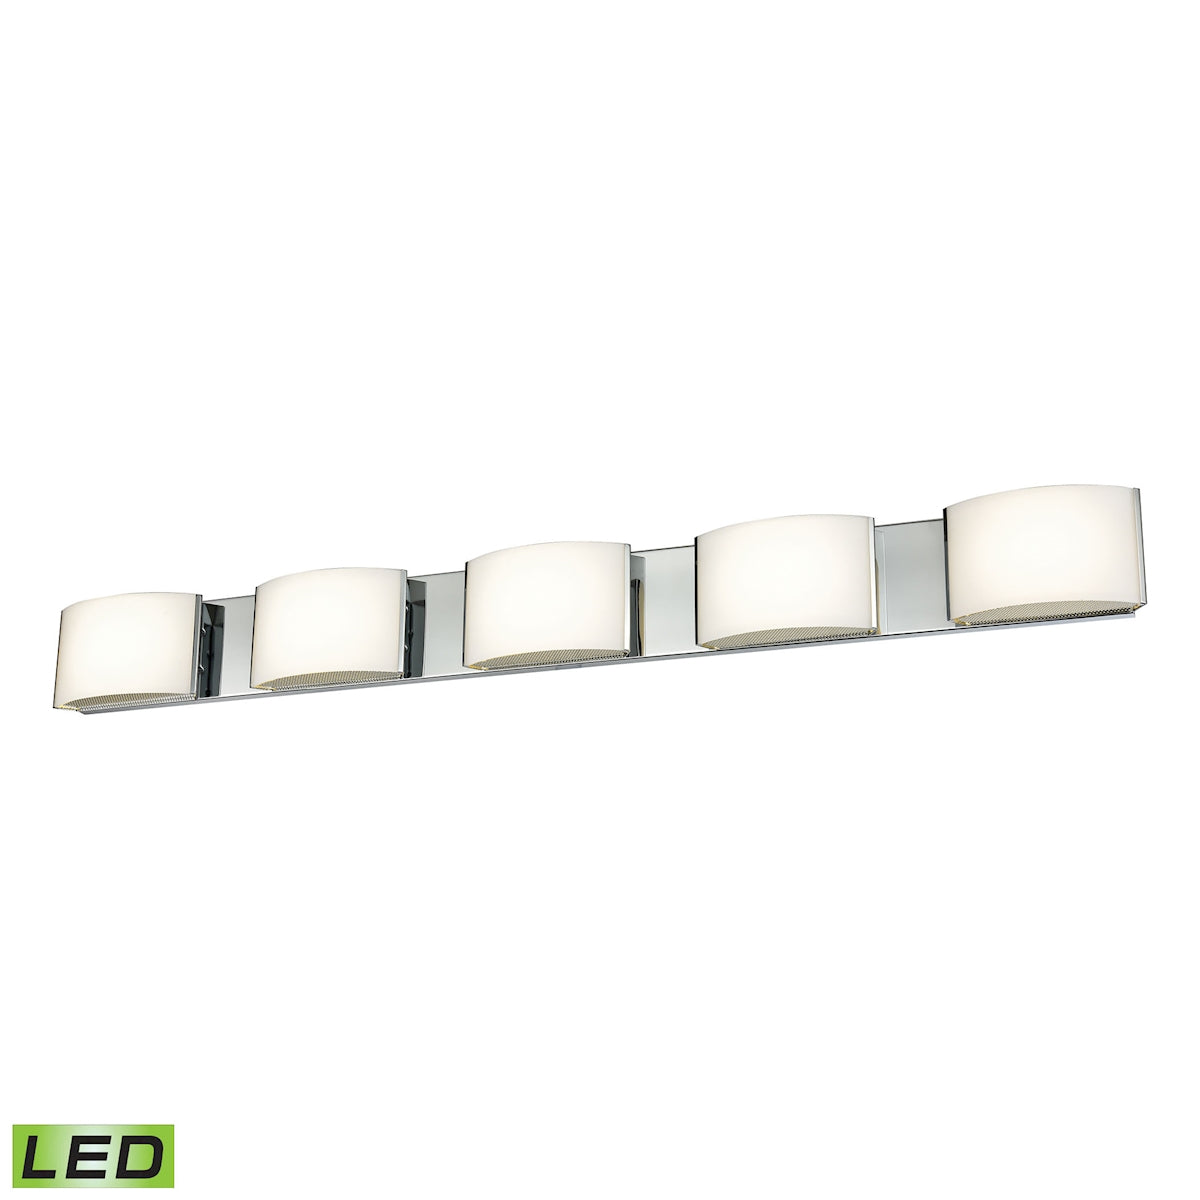 ELK Lighting BVL915-10-15 Pandora 5-Light Vanity Sconce in Chrome with Opal Glass - Integrated LED